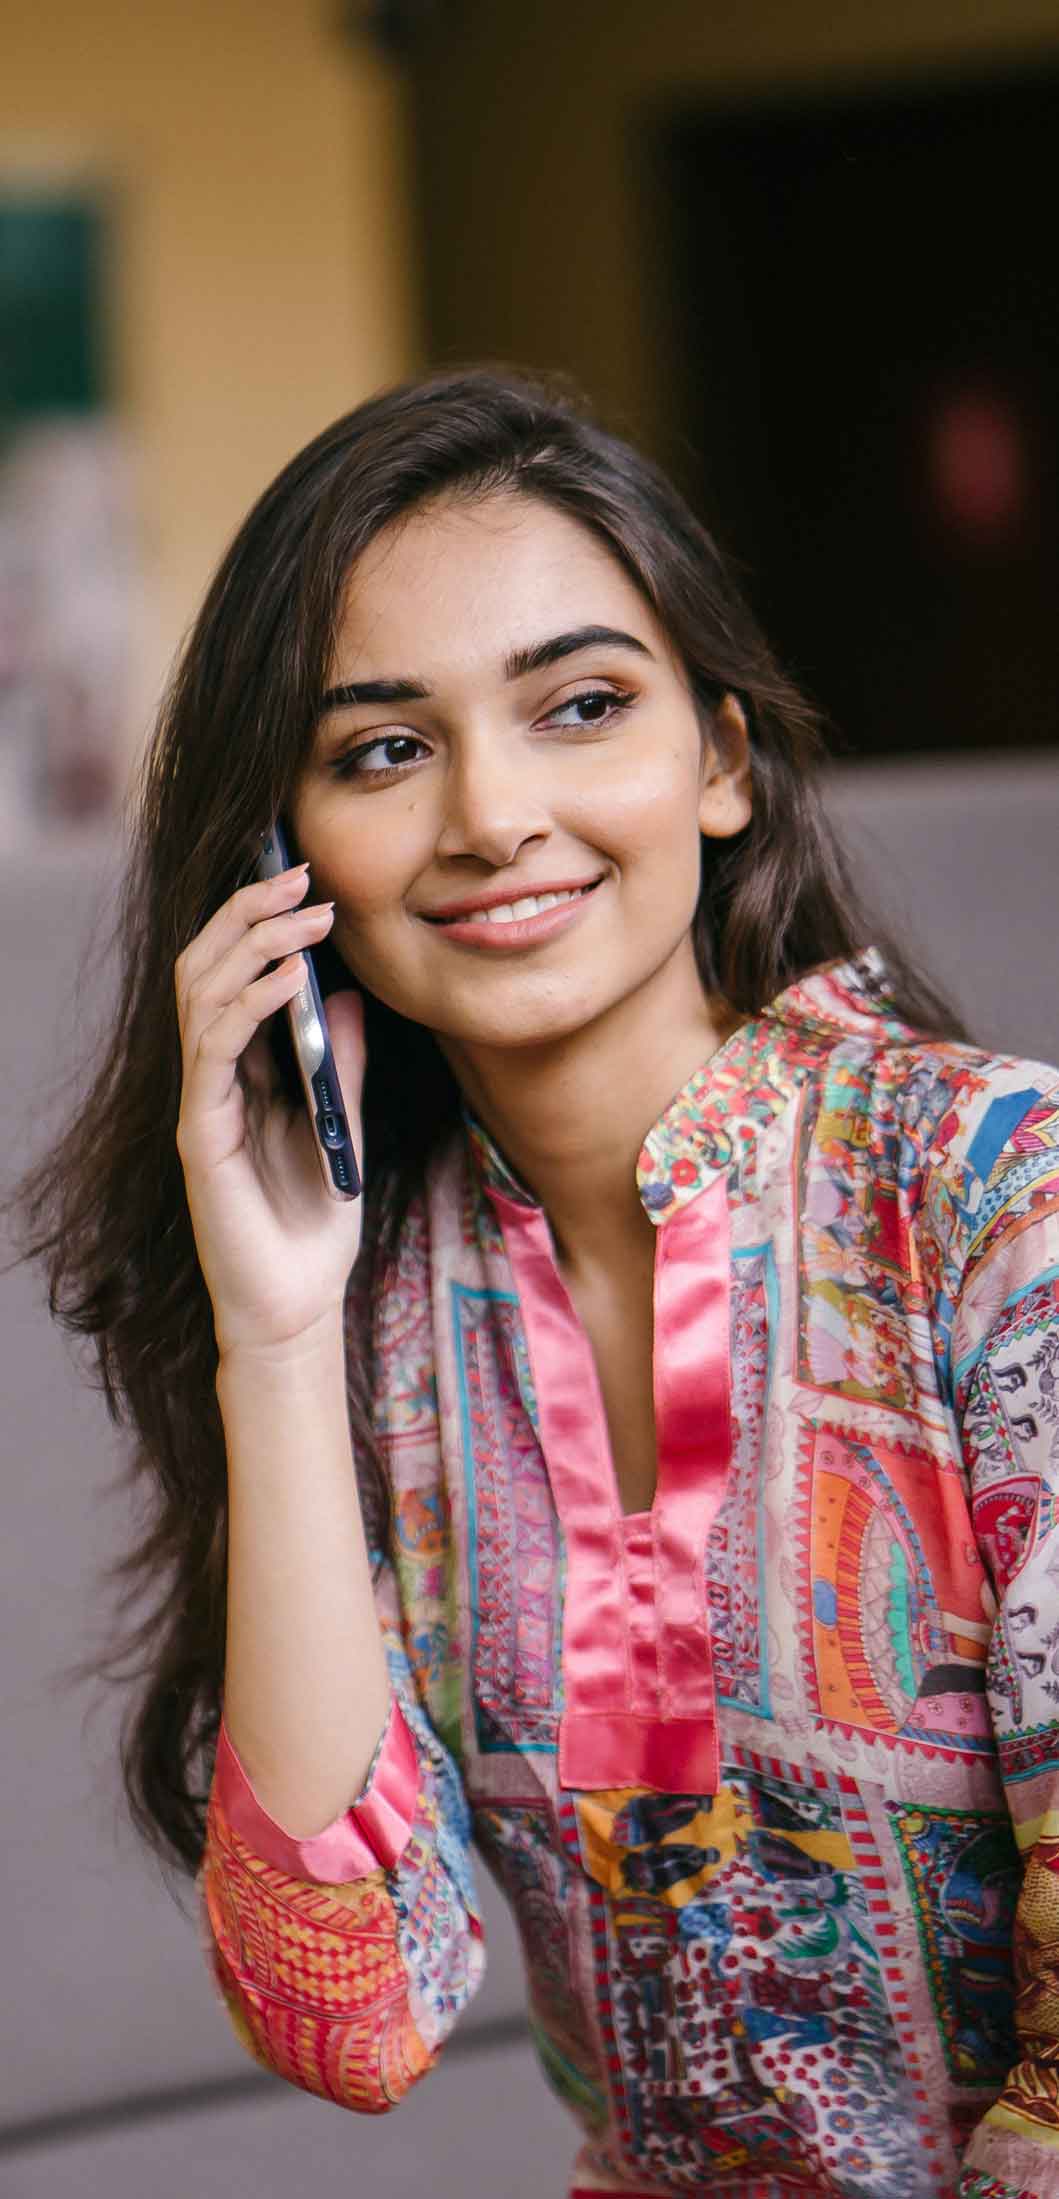 A smiling, attractive young woman on a phone call.